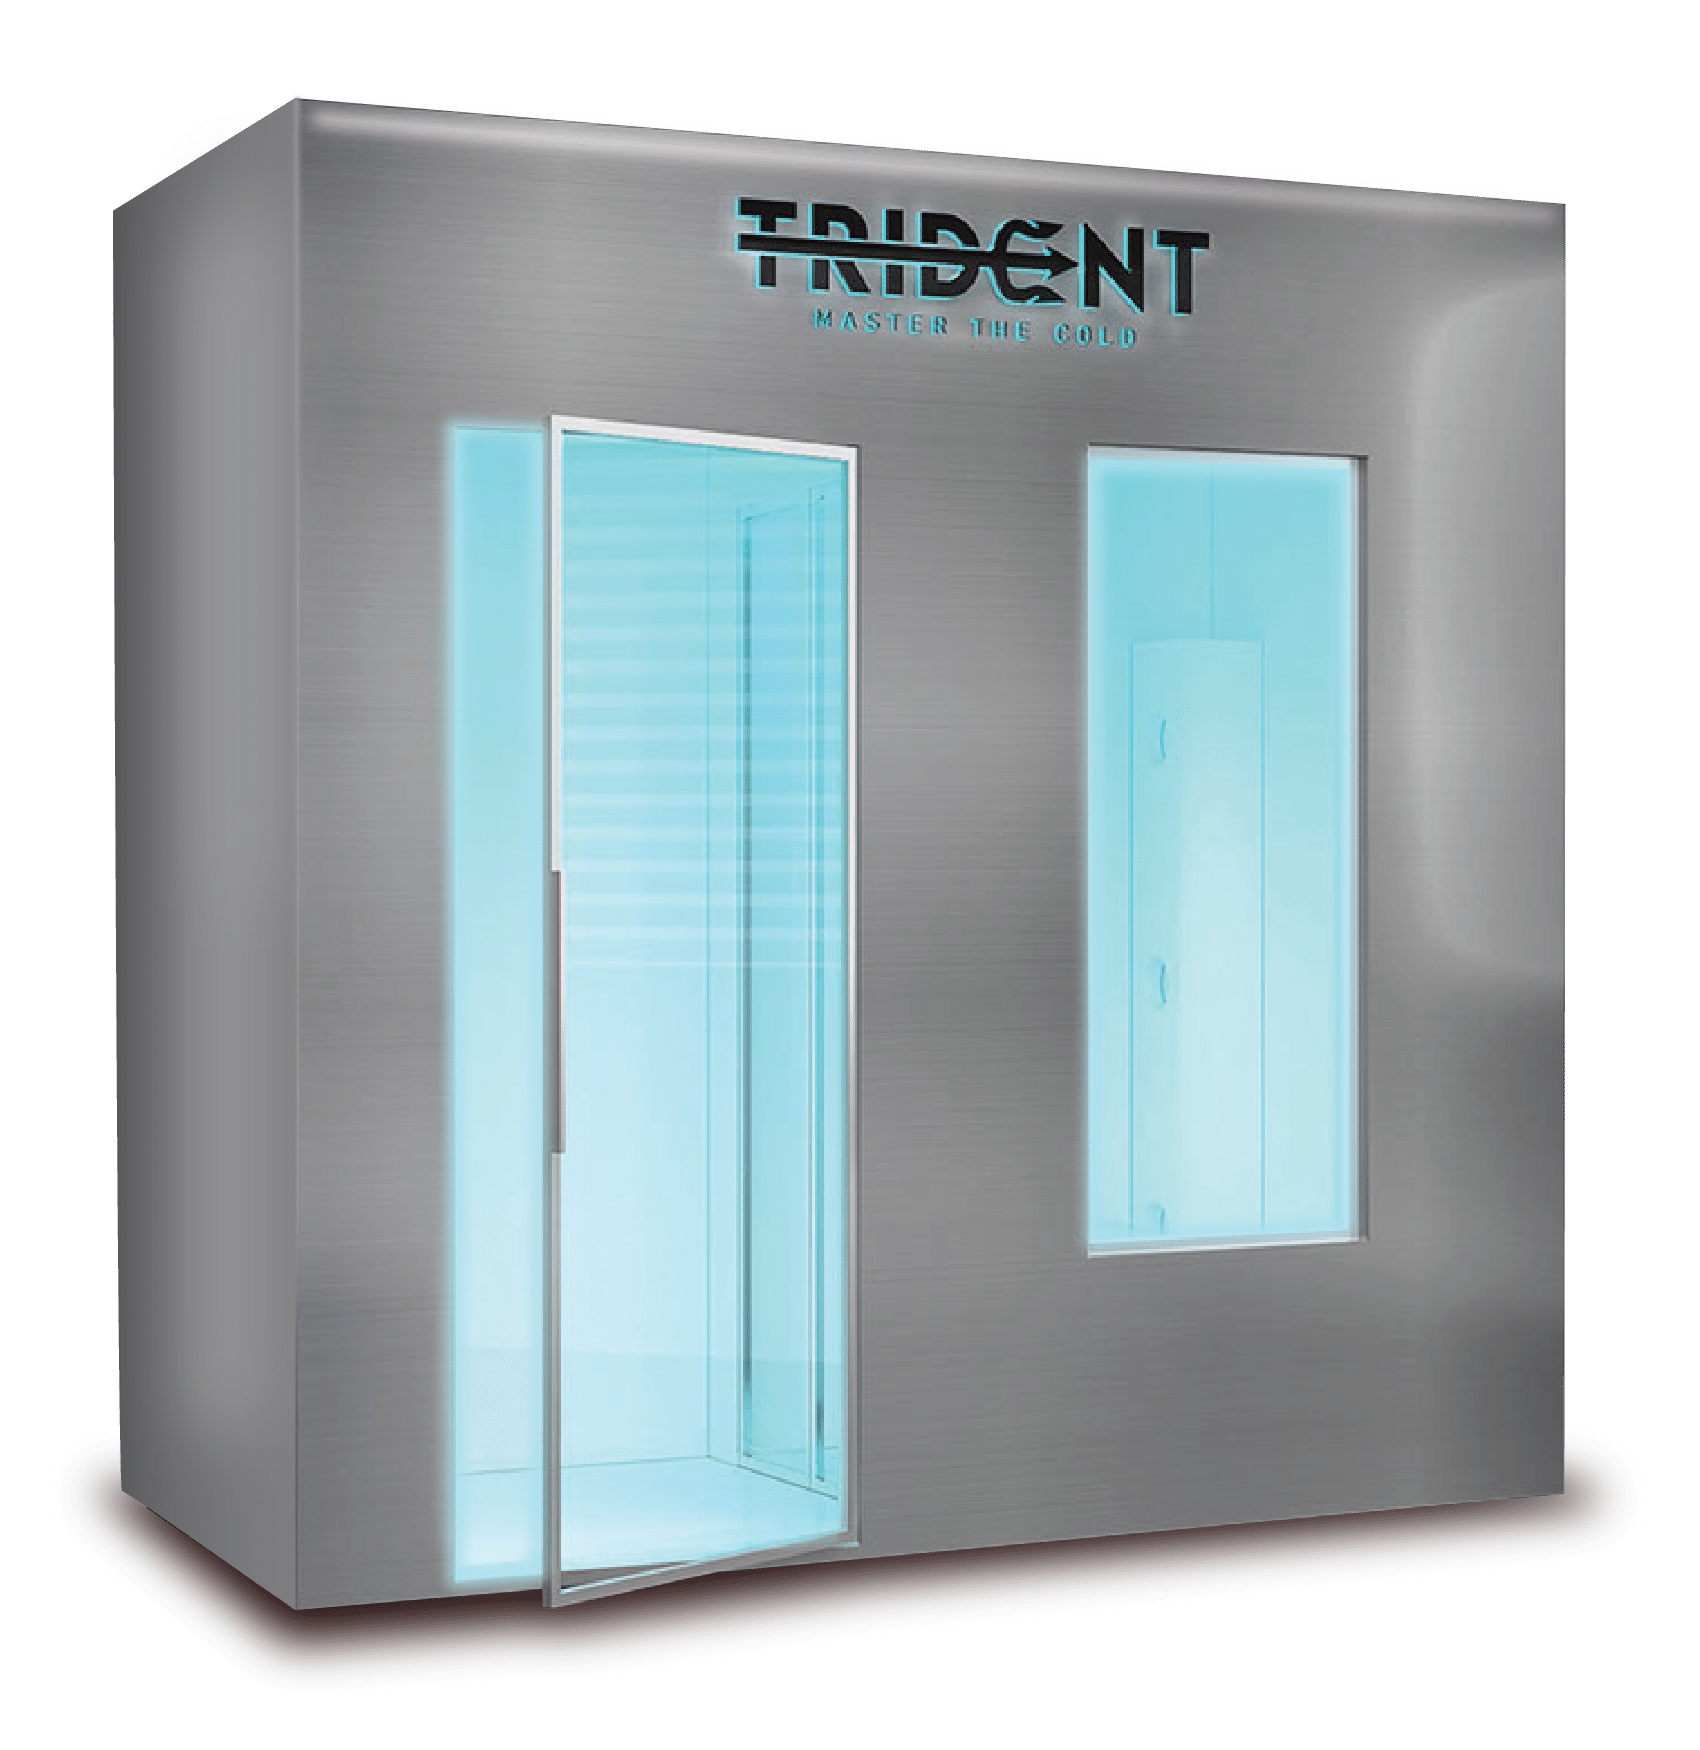 Trident cryotherapy chamber